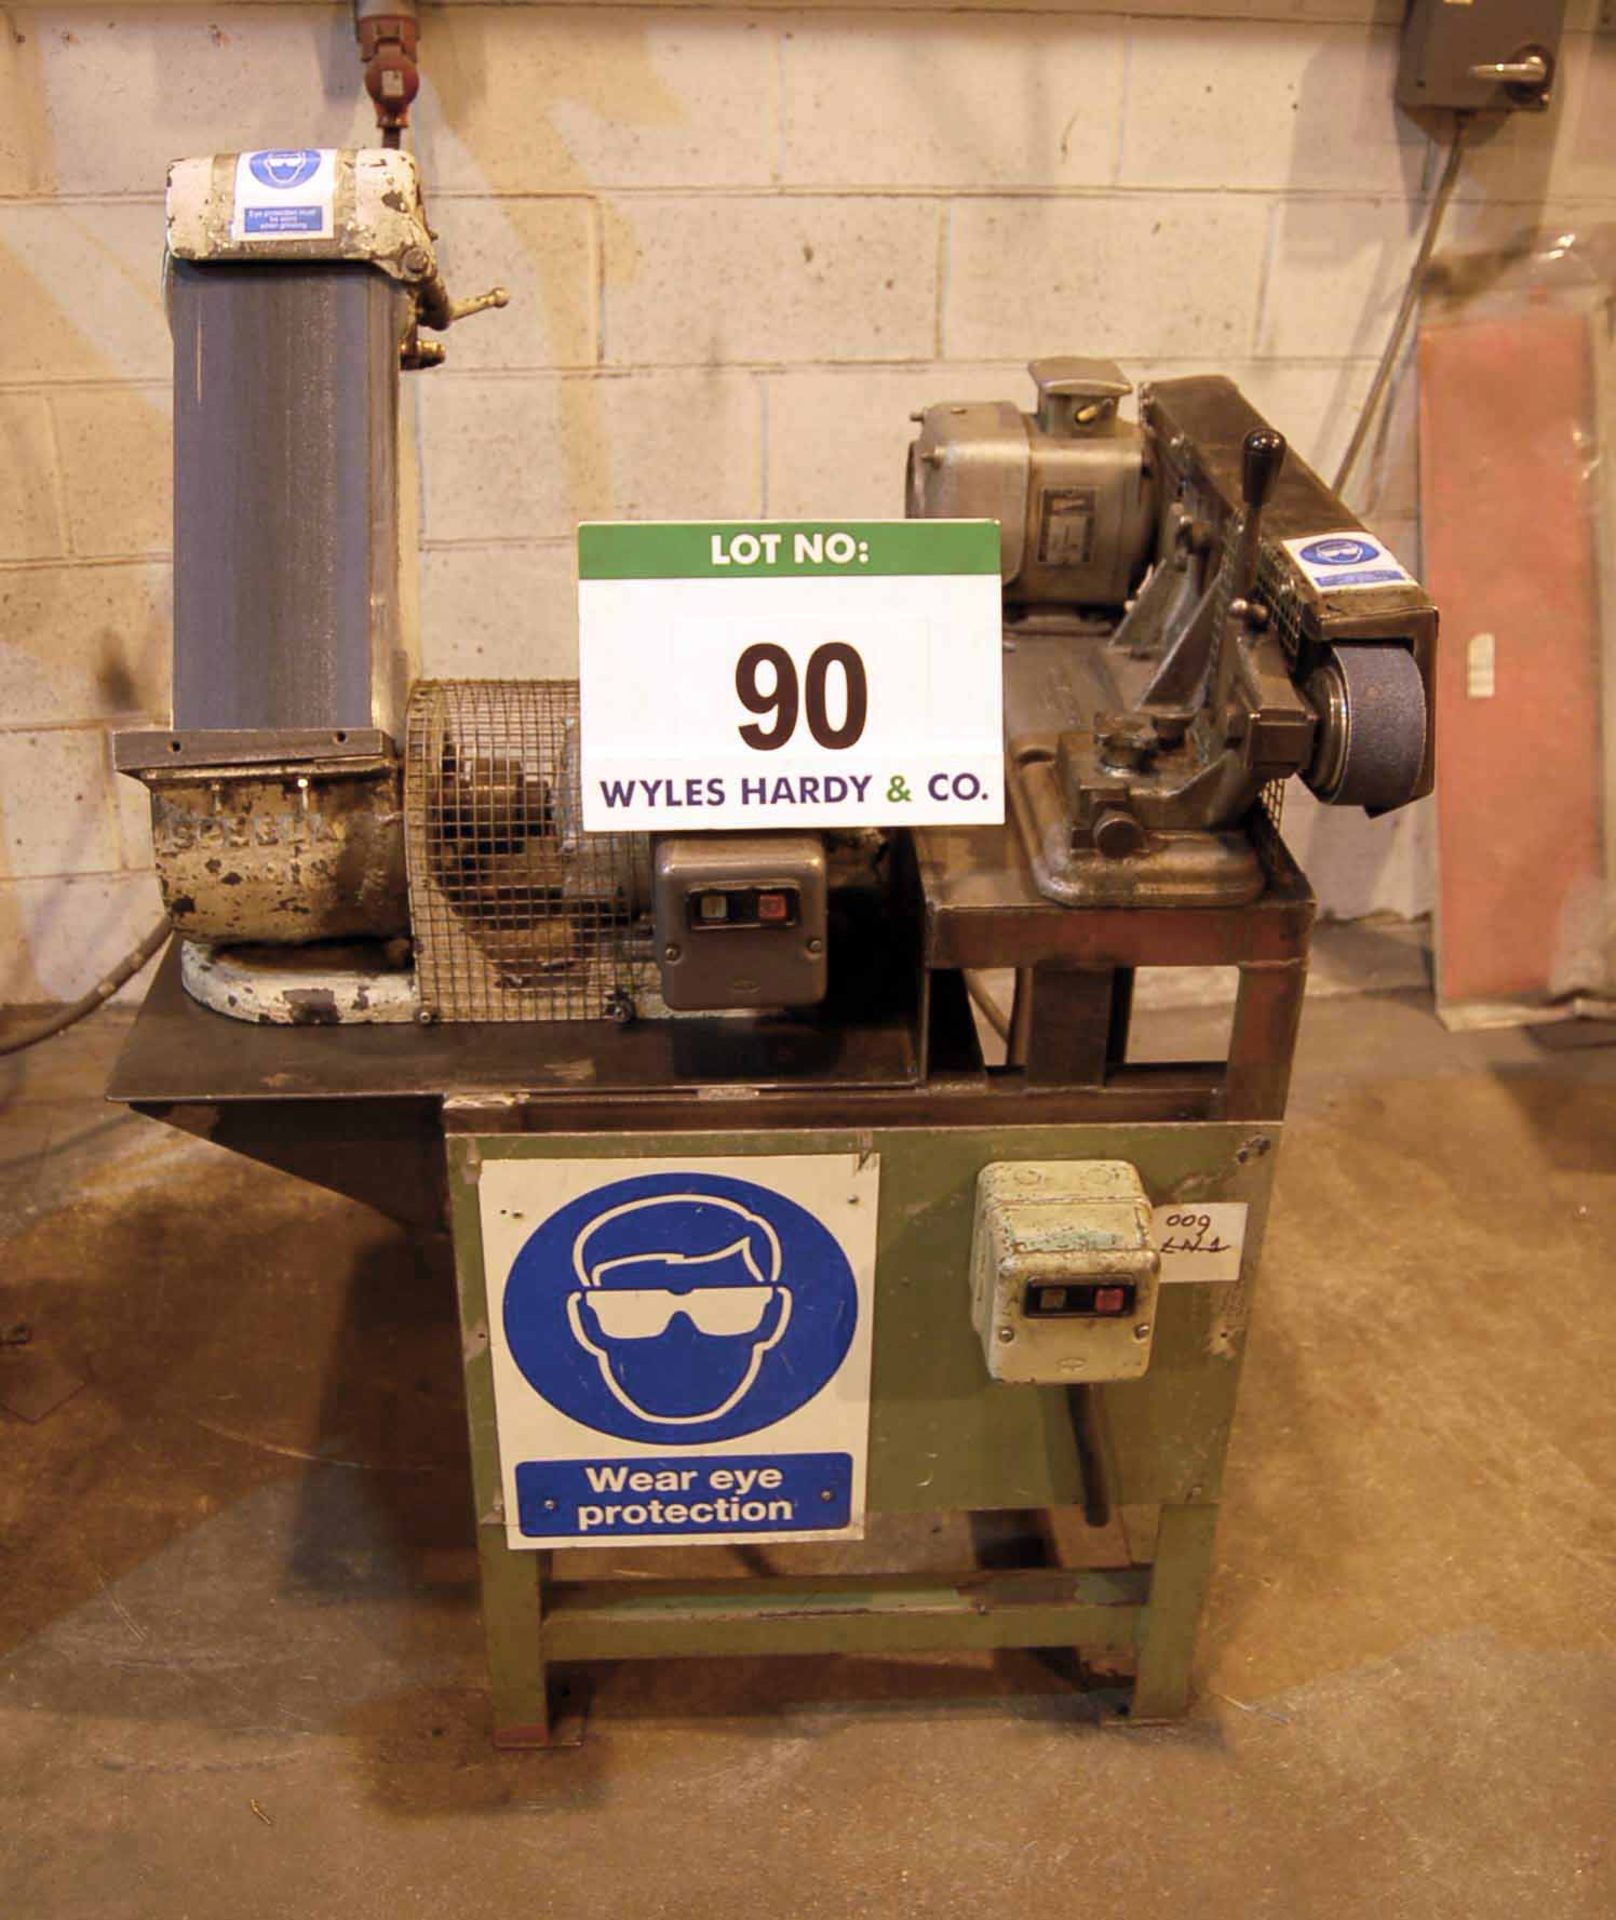 A SPEEDA 6 inch Vertical Linisher and A 2 inch Horizontal Linisher on Steel Stand with Emergency